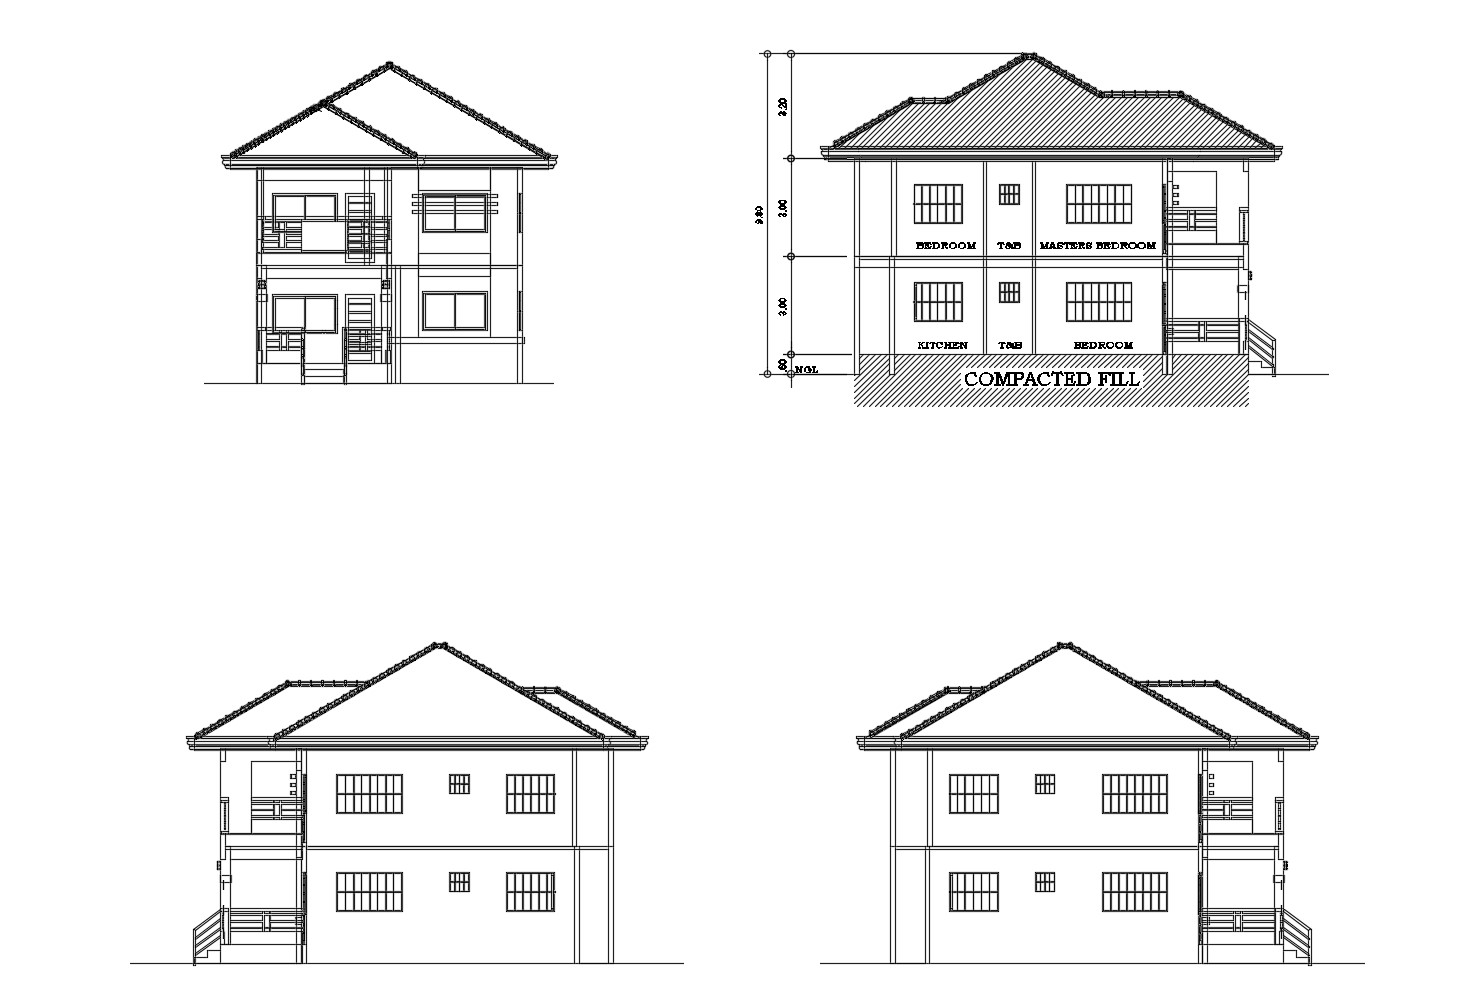 Elevation Drawing Of House Design In Autocad Fri Apr 2019 07 26 25 